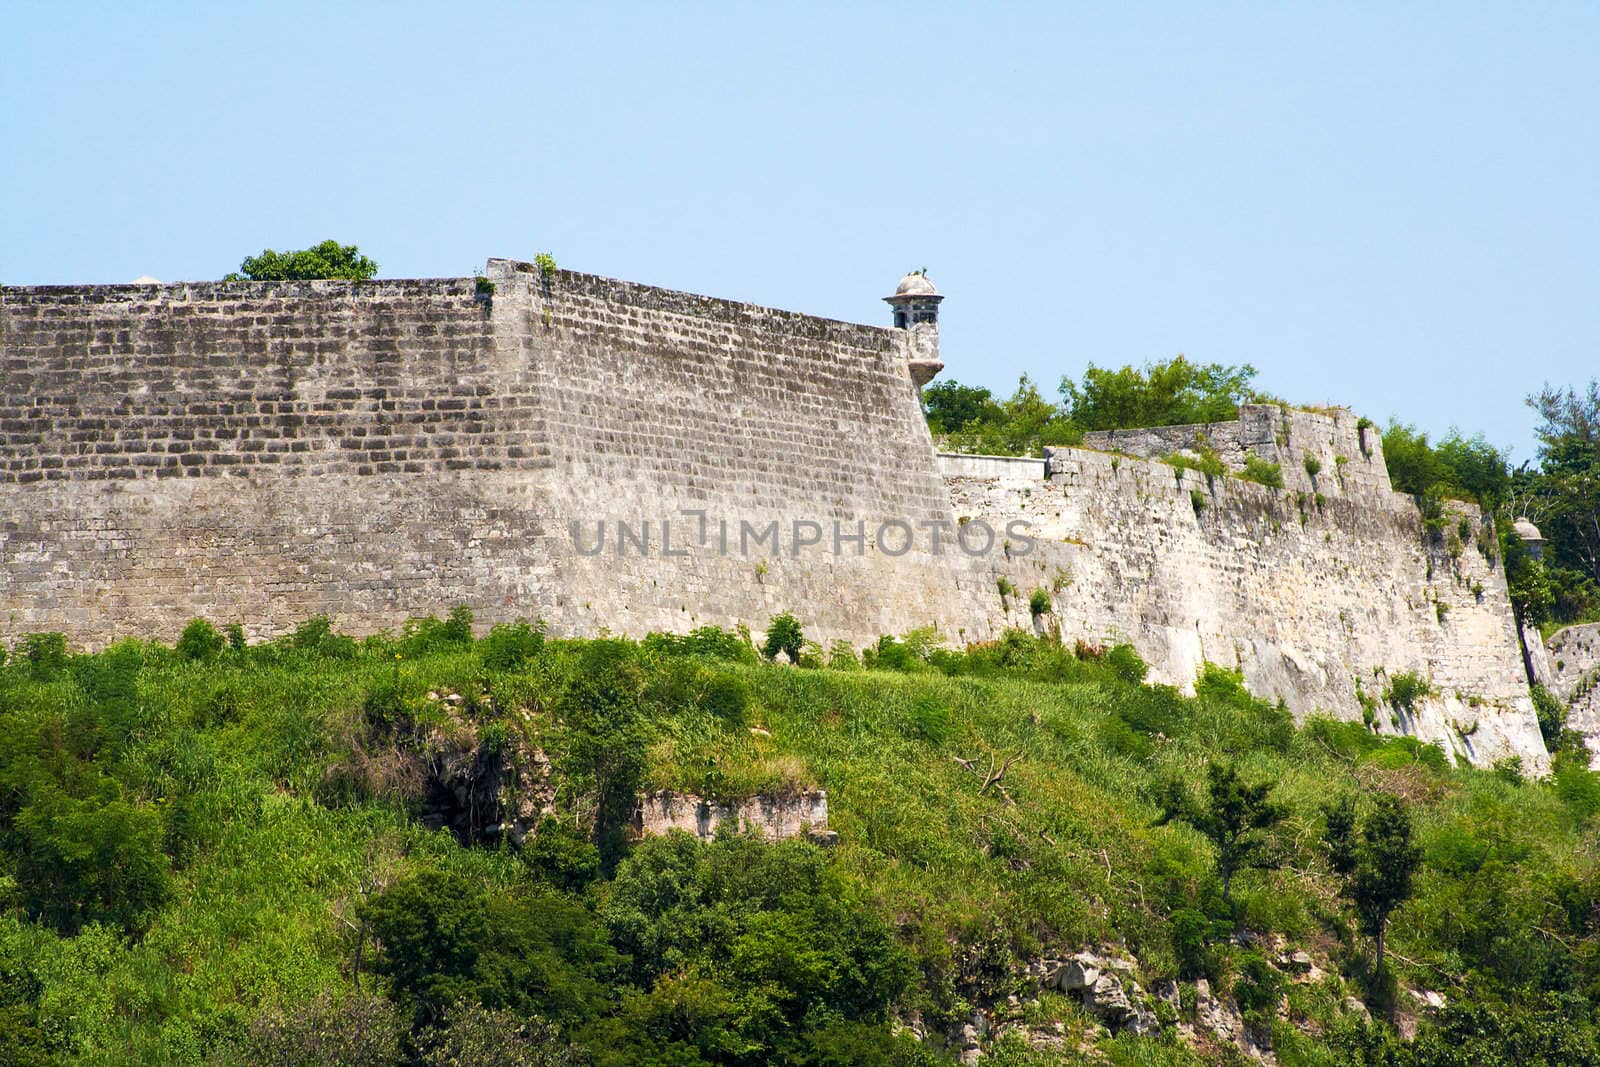 Walls of a fortress on a hill covered by green vegetation